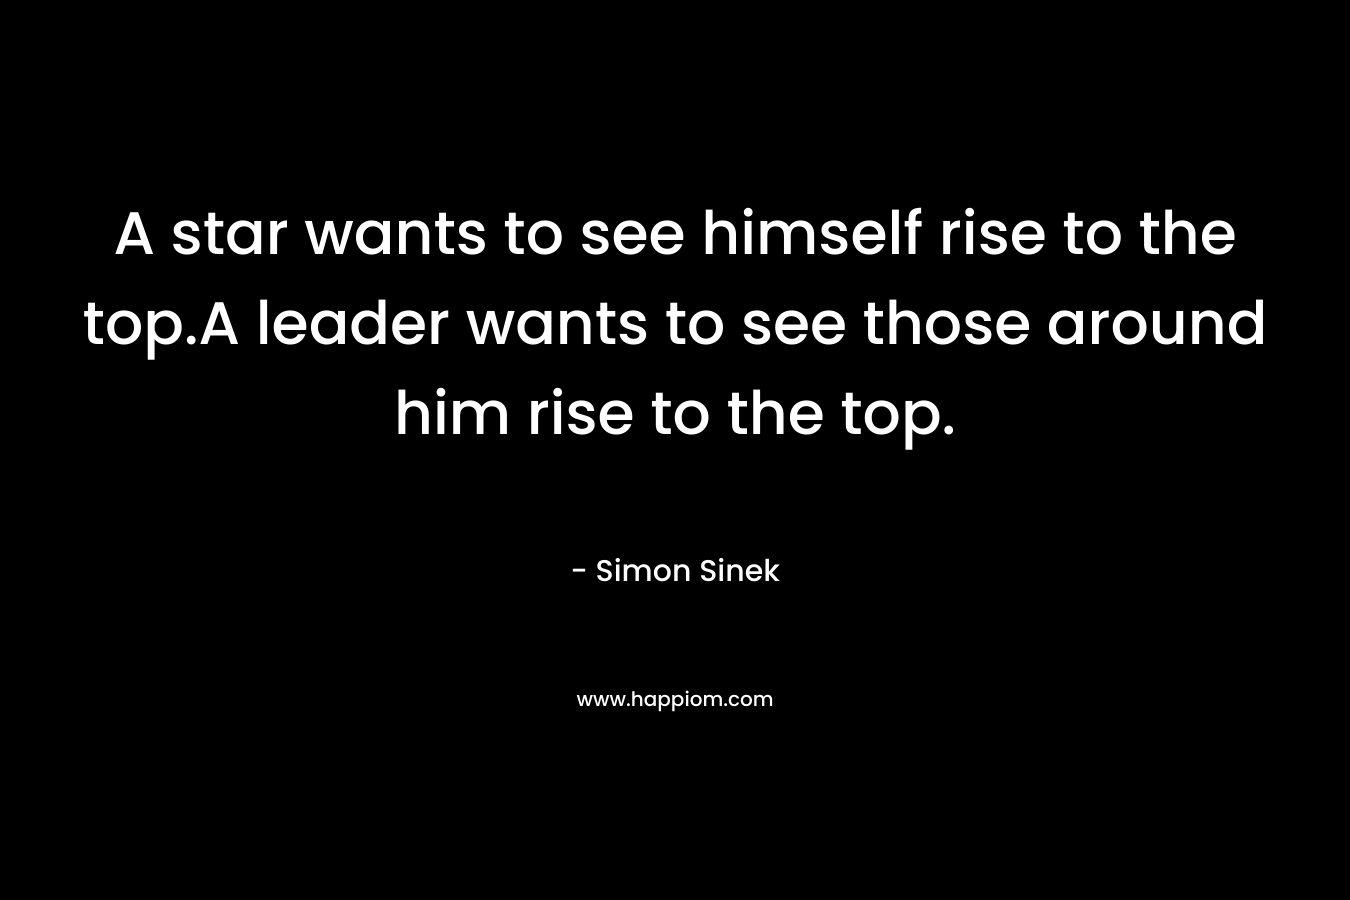 A star wants to see himself rise to the top.A leader wants to see those around him rise to the top. – Simon Sinek